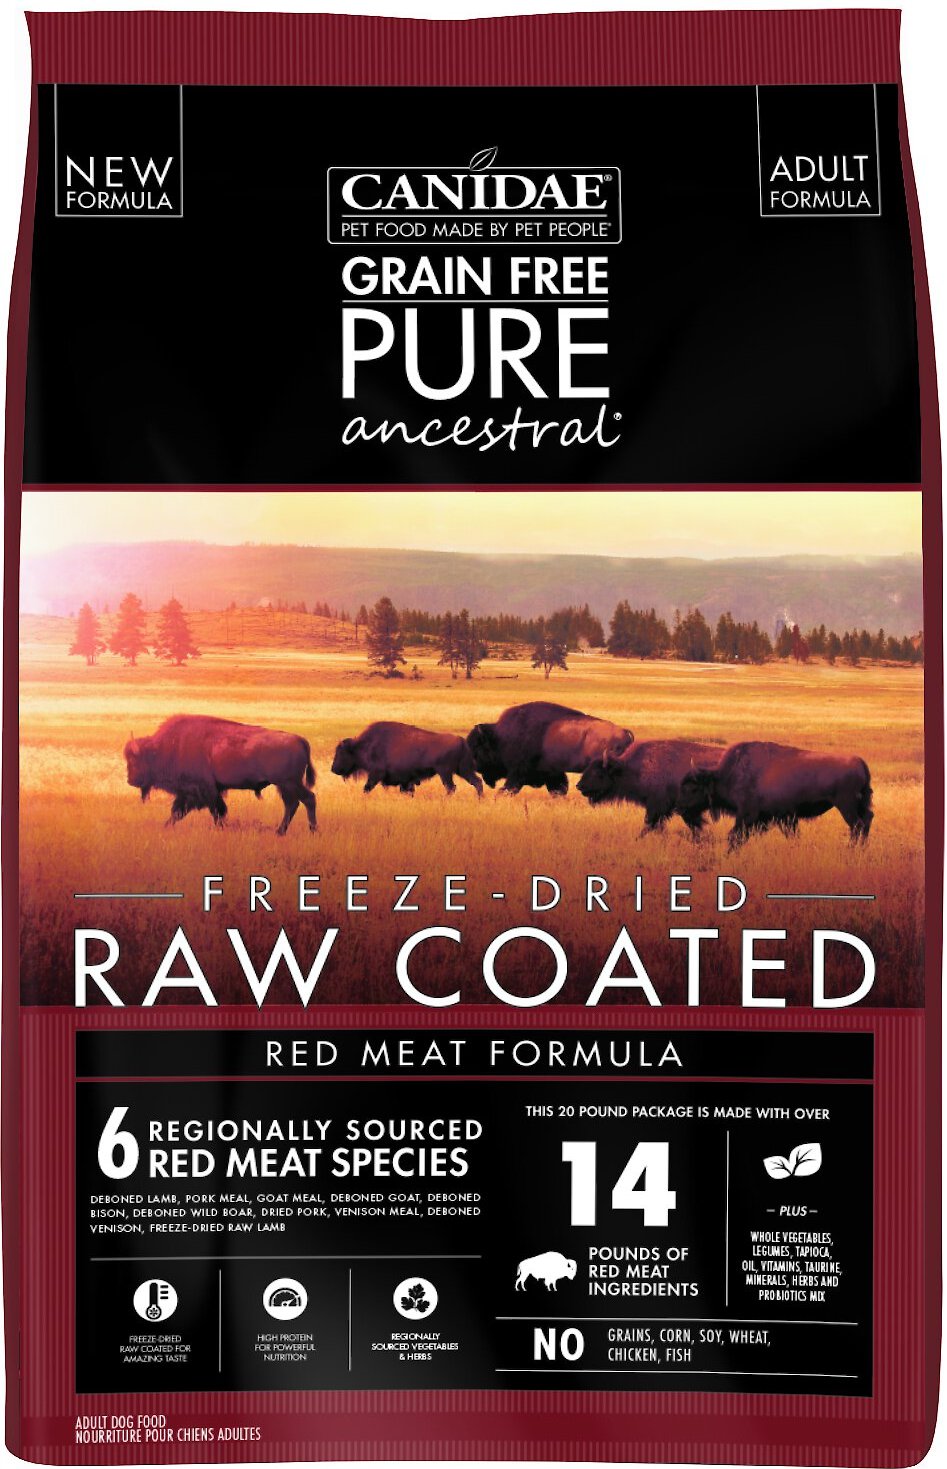 CANIDAE Grain-Free PURE Ancestral Red Meat Formula